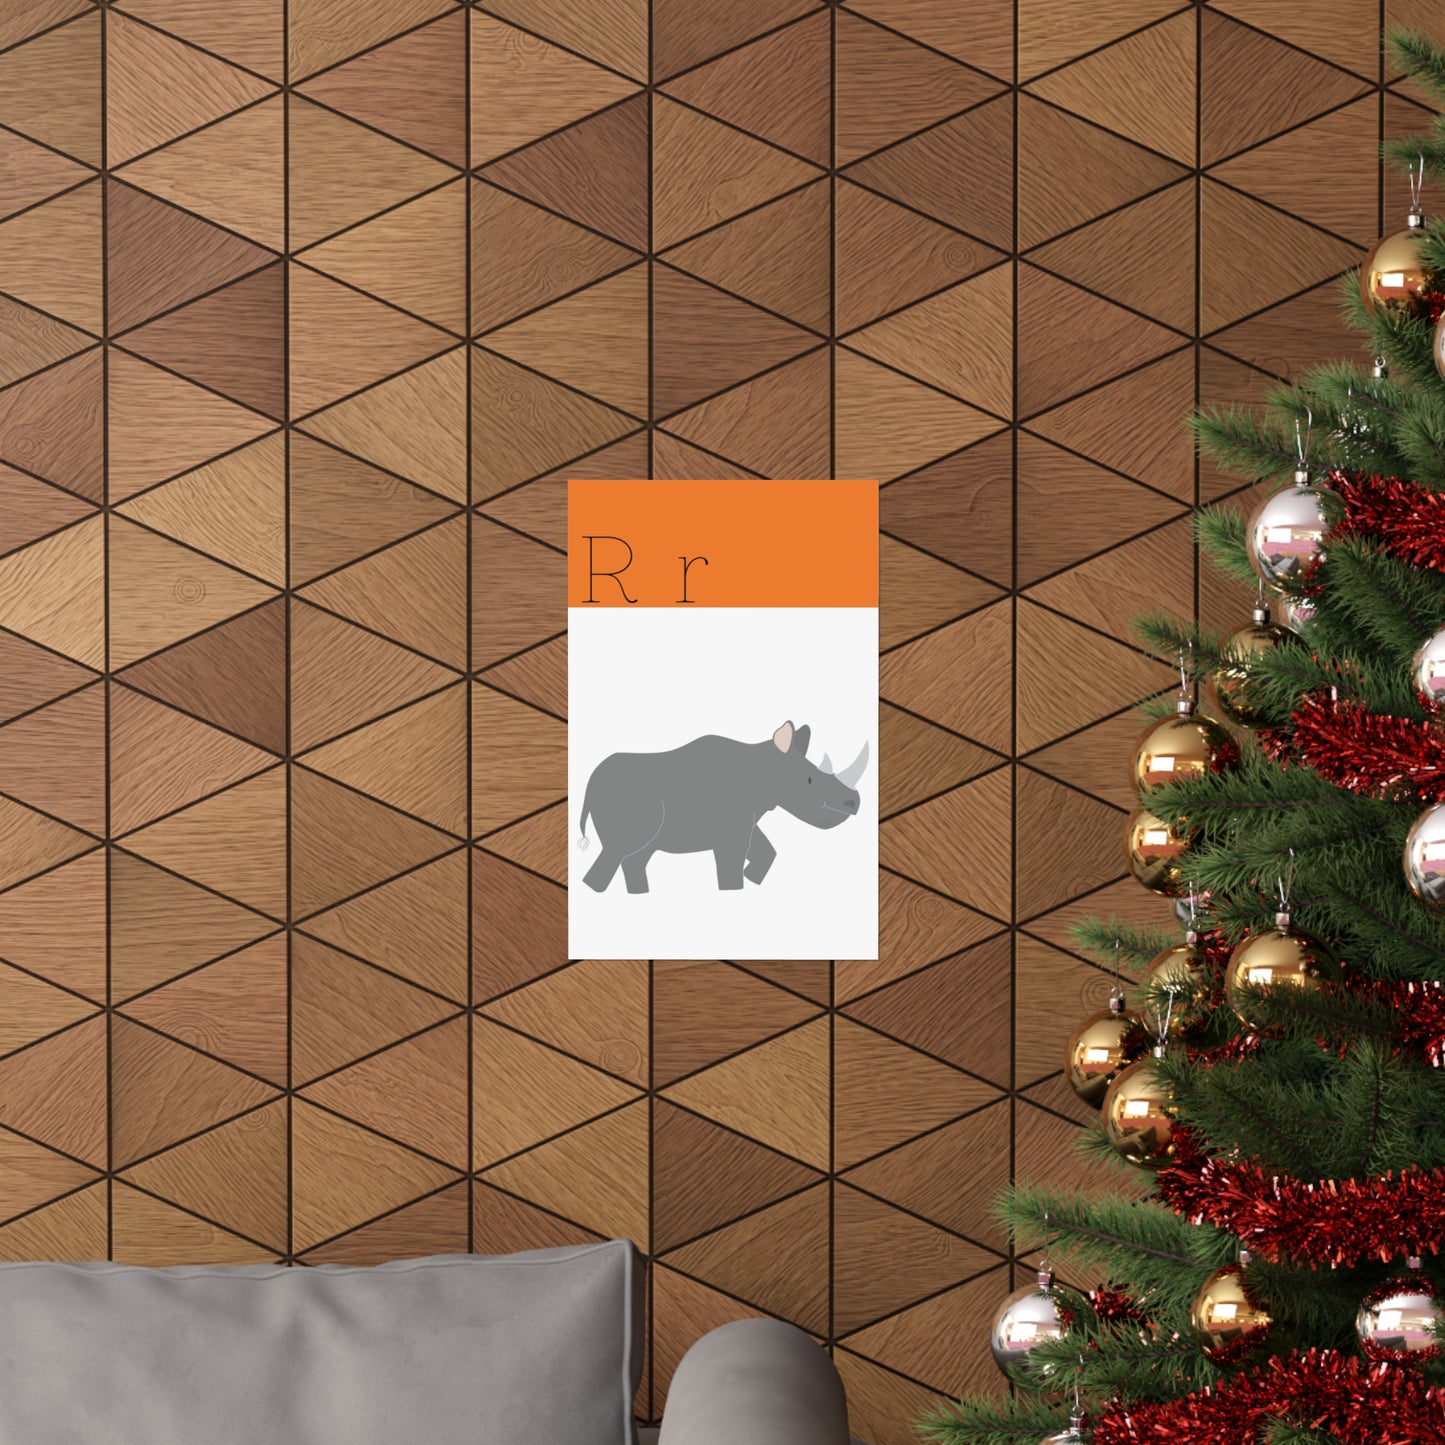 Rhino Poster onWooden Wall Beside a Christmas Tree